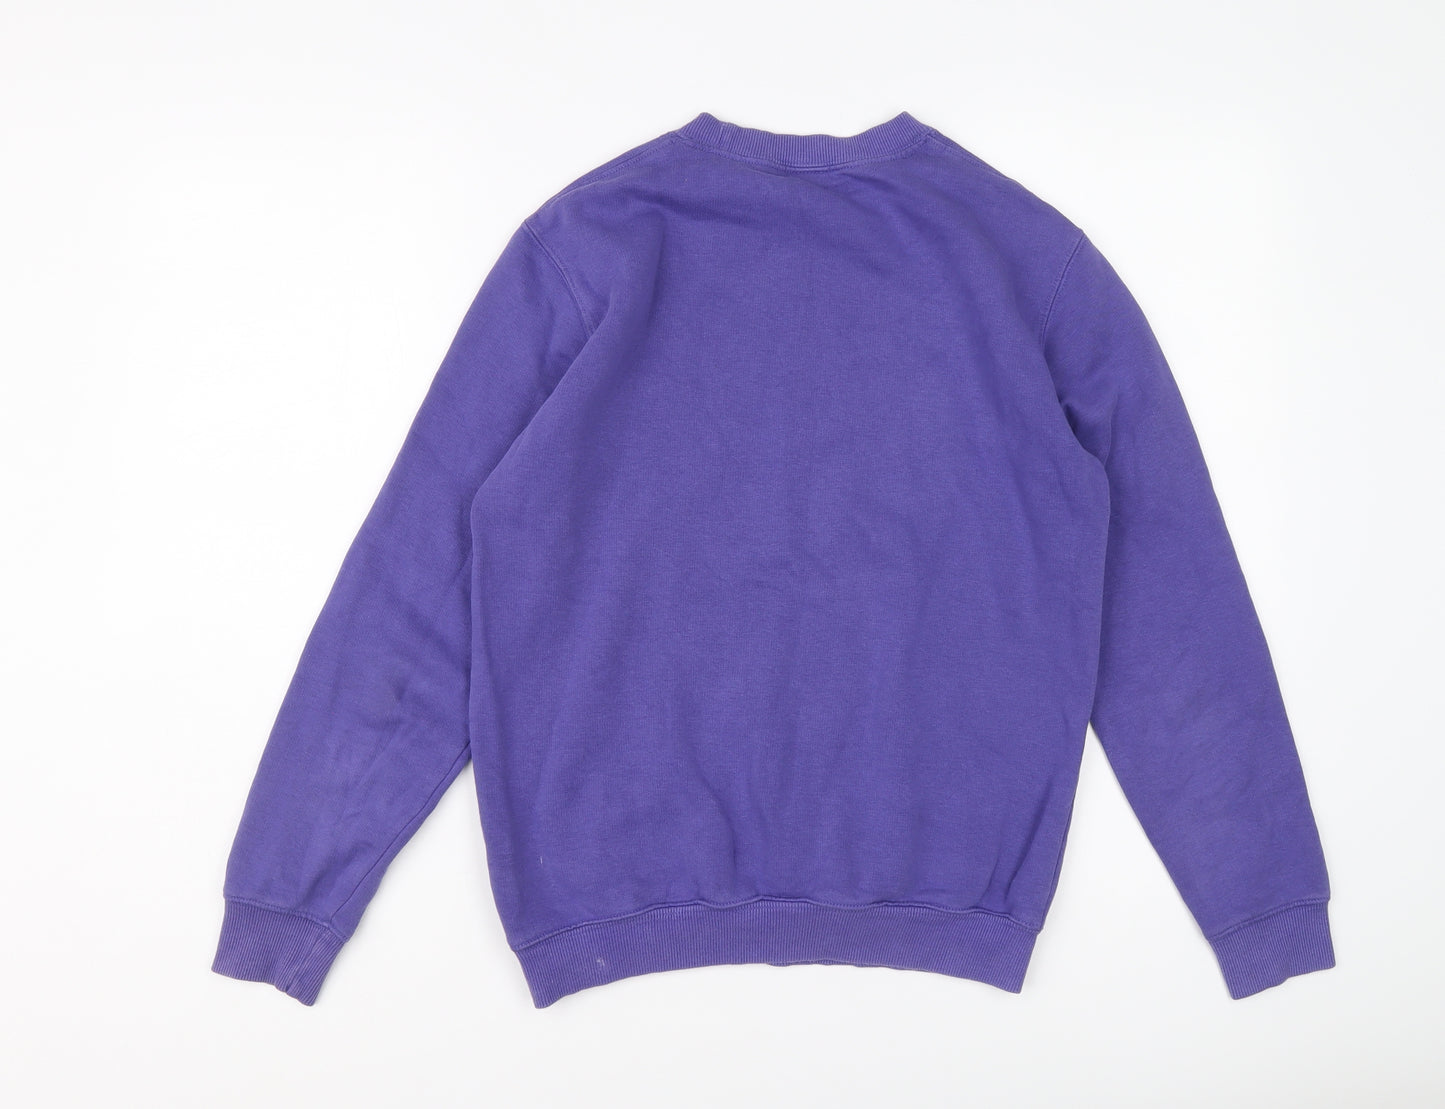 Cotton Traders Womens Purple Cotton Pullover Sweatshirt Size XS Pullover